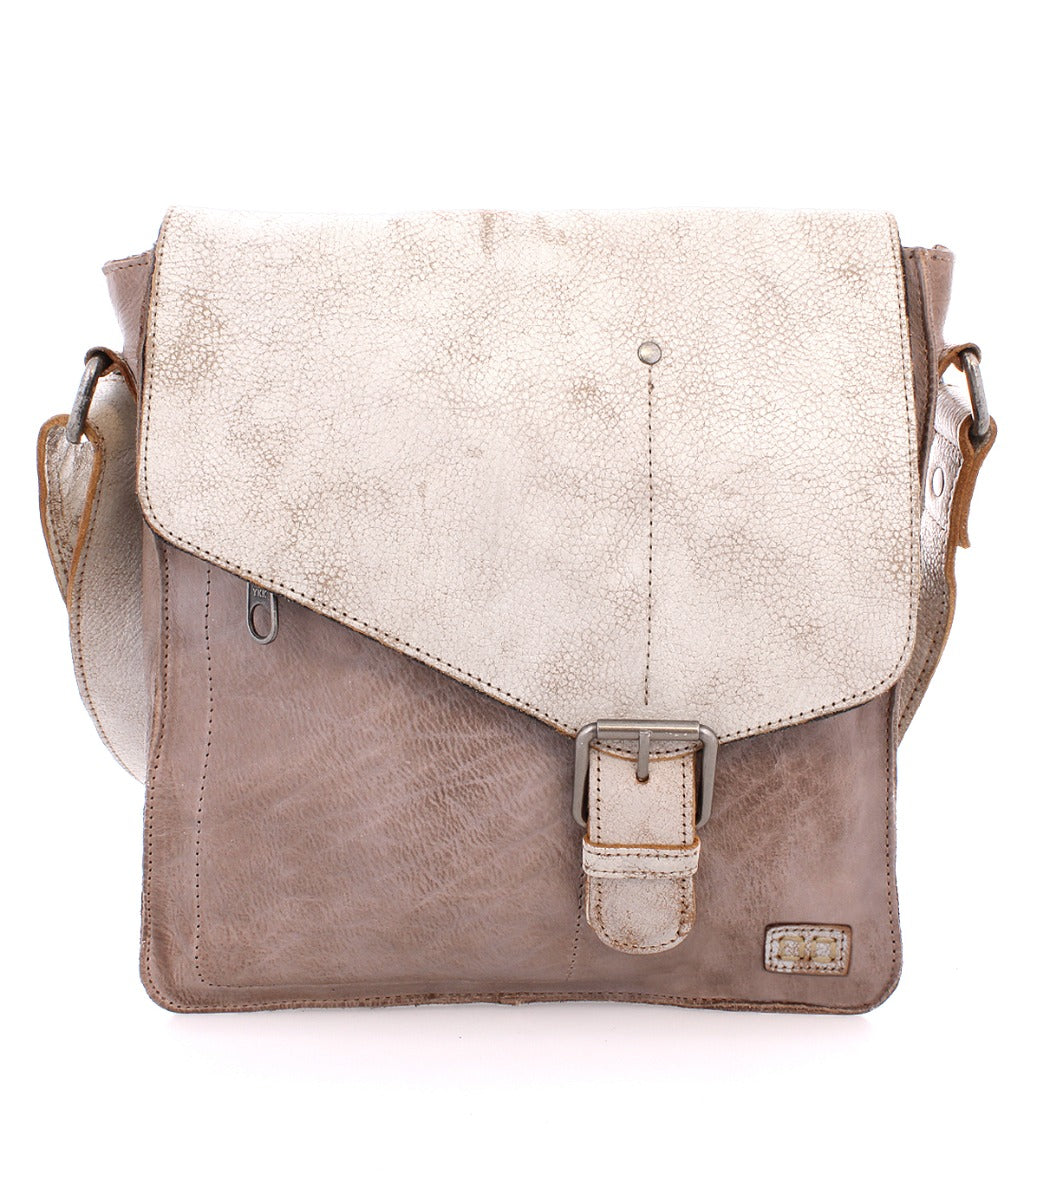 A Venice Beach leather messenger bag with an adjustable strap, made by Bed Stu.